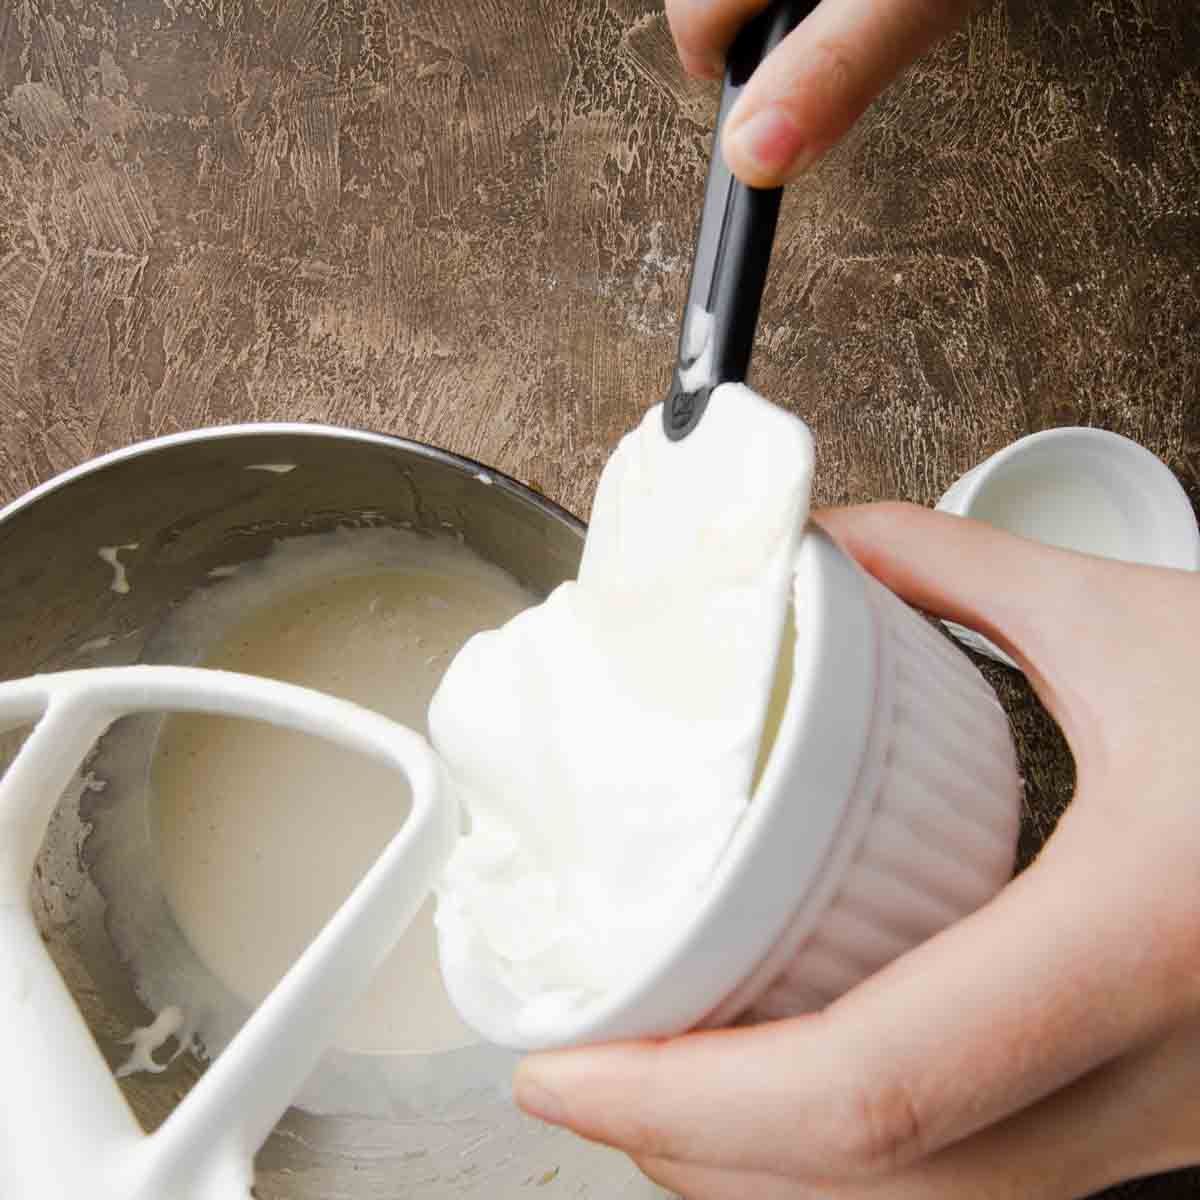 Adding sour cream and buttermilk into the stand mixer